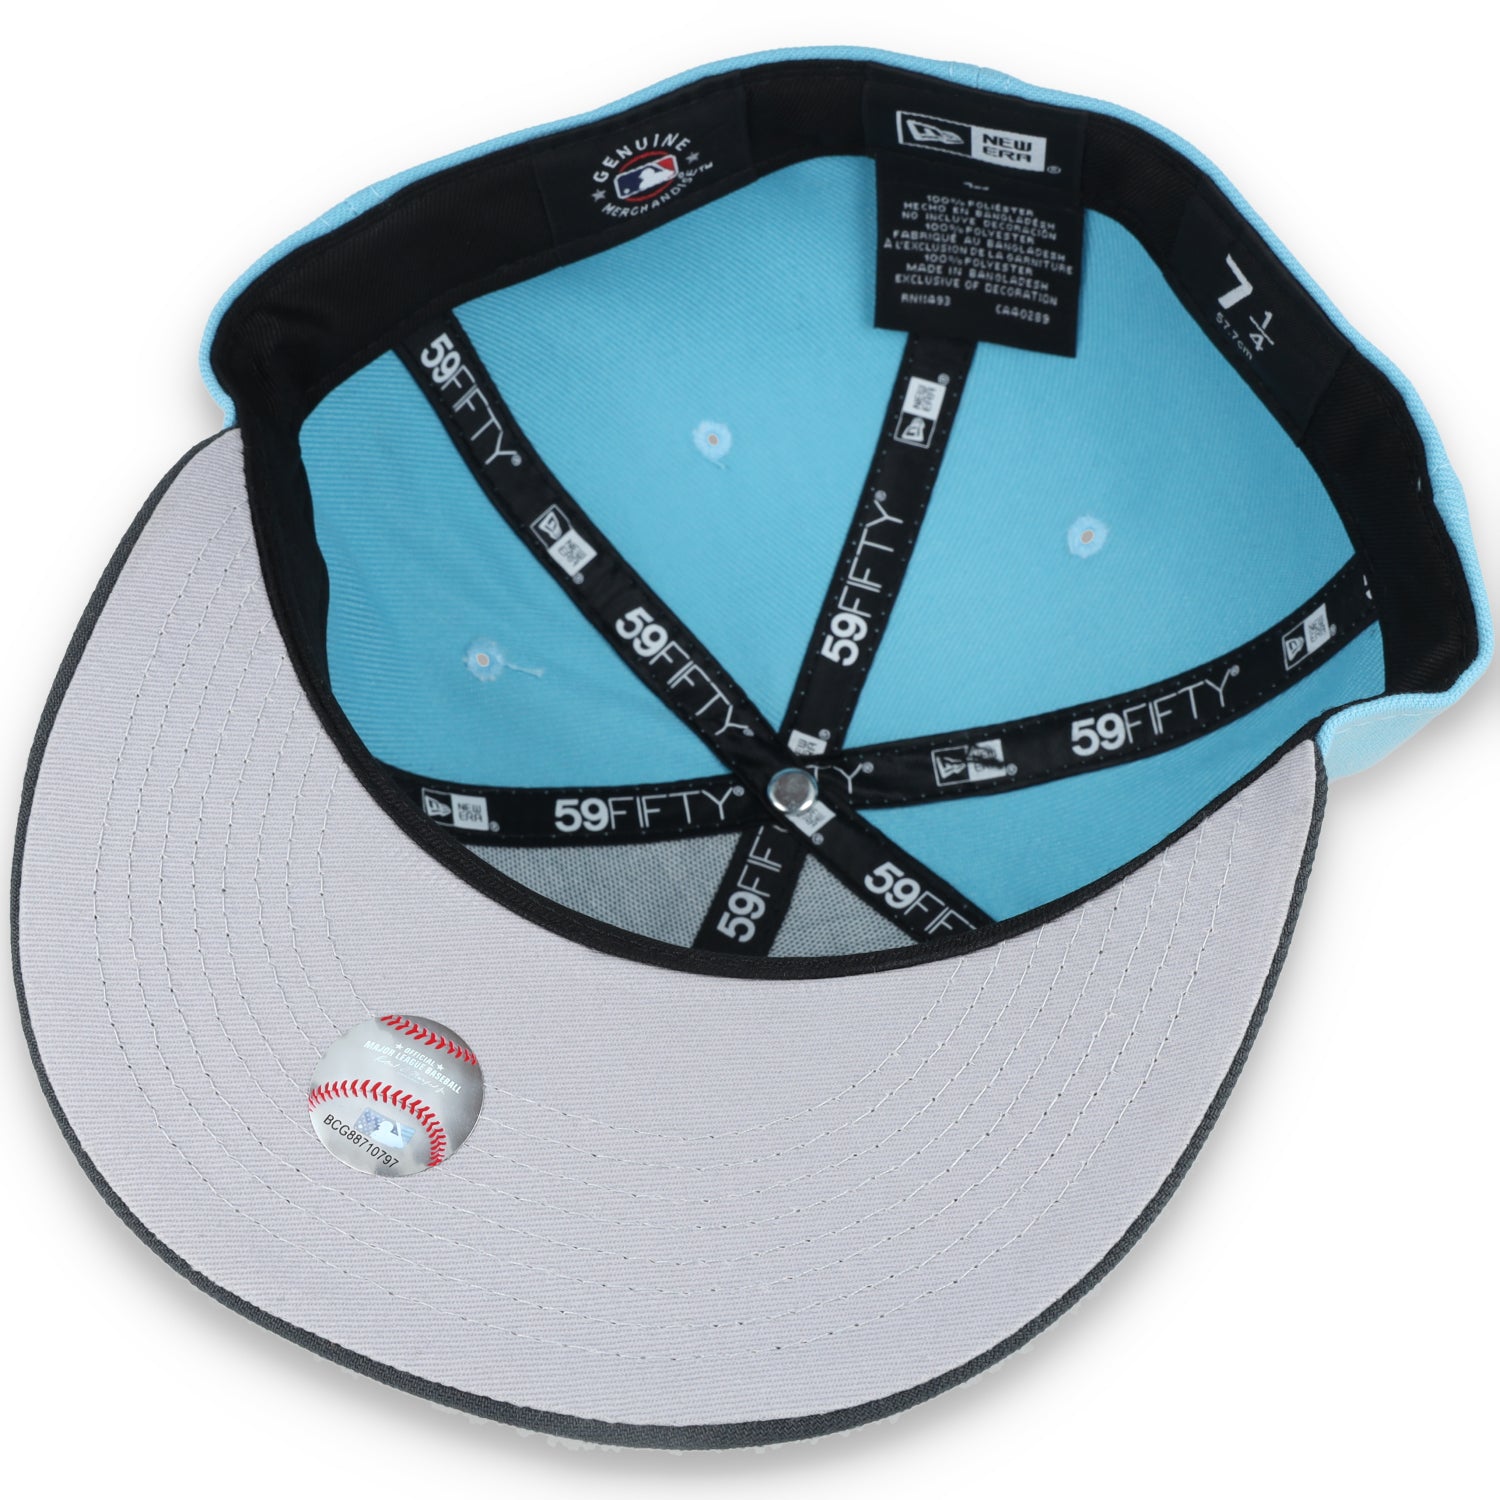 NEW ERA NEW YORK YANKEES 59FIFTY COLOR PACK-BABY BLUE/GREY